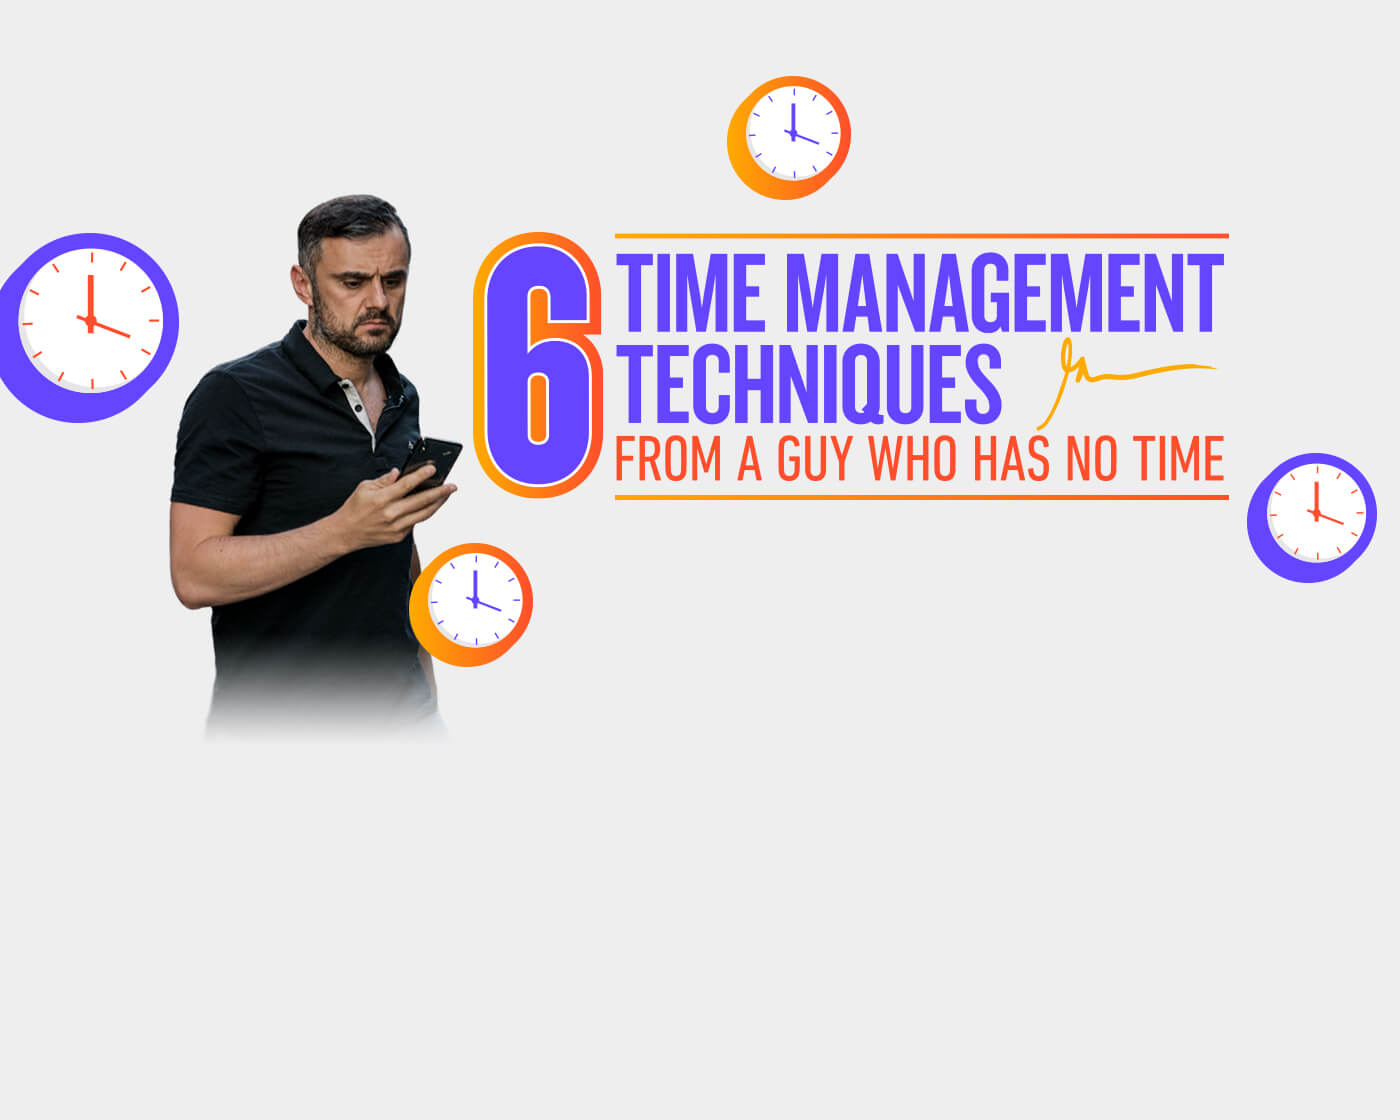 6 TIME MANAGEMENT TECHNIQUES FROM A GUY WHO HAS NO TIME